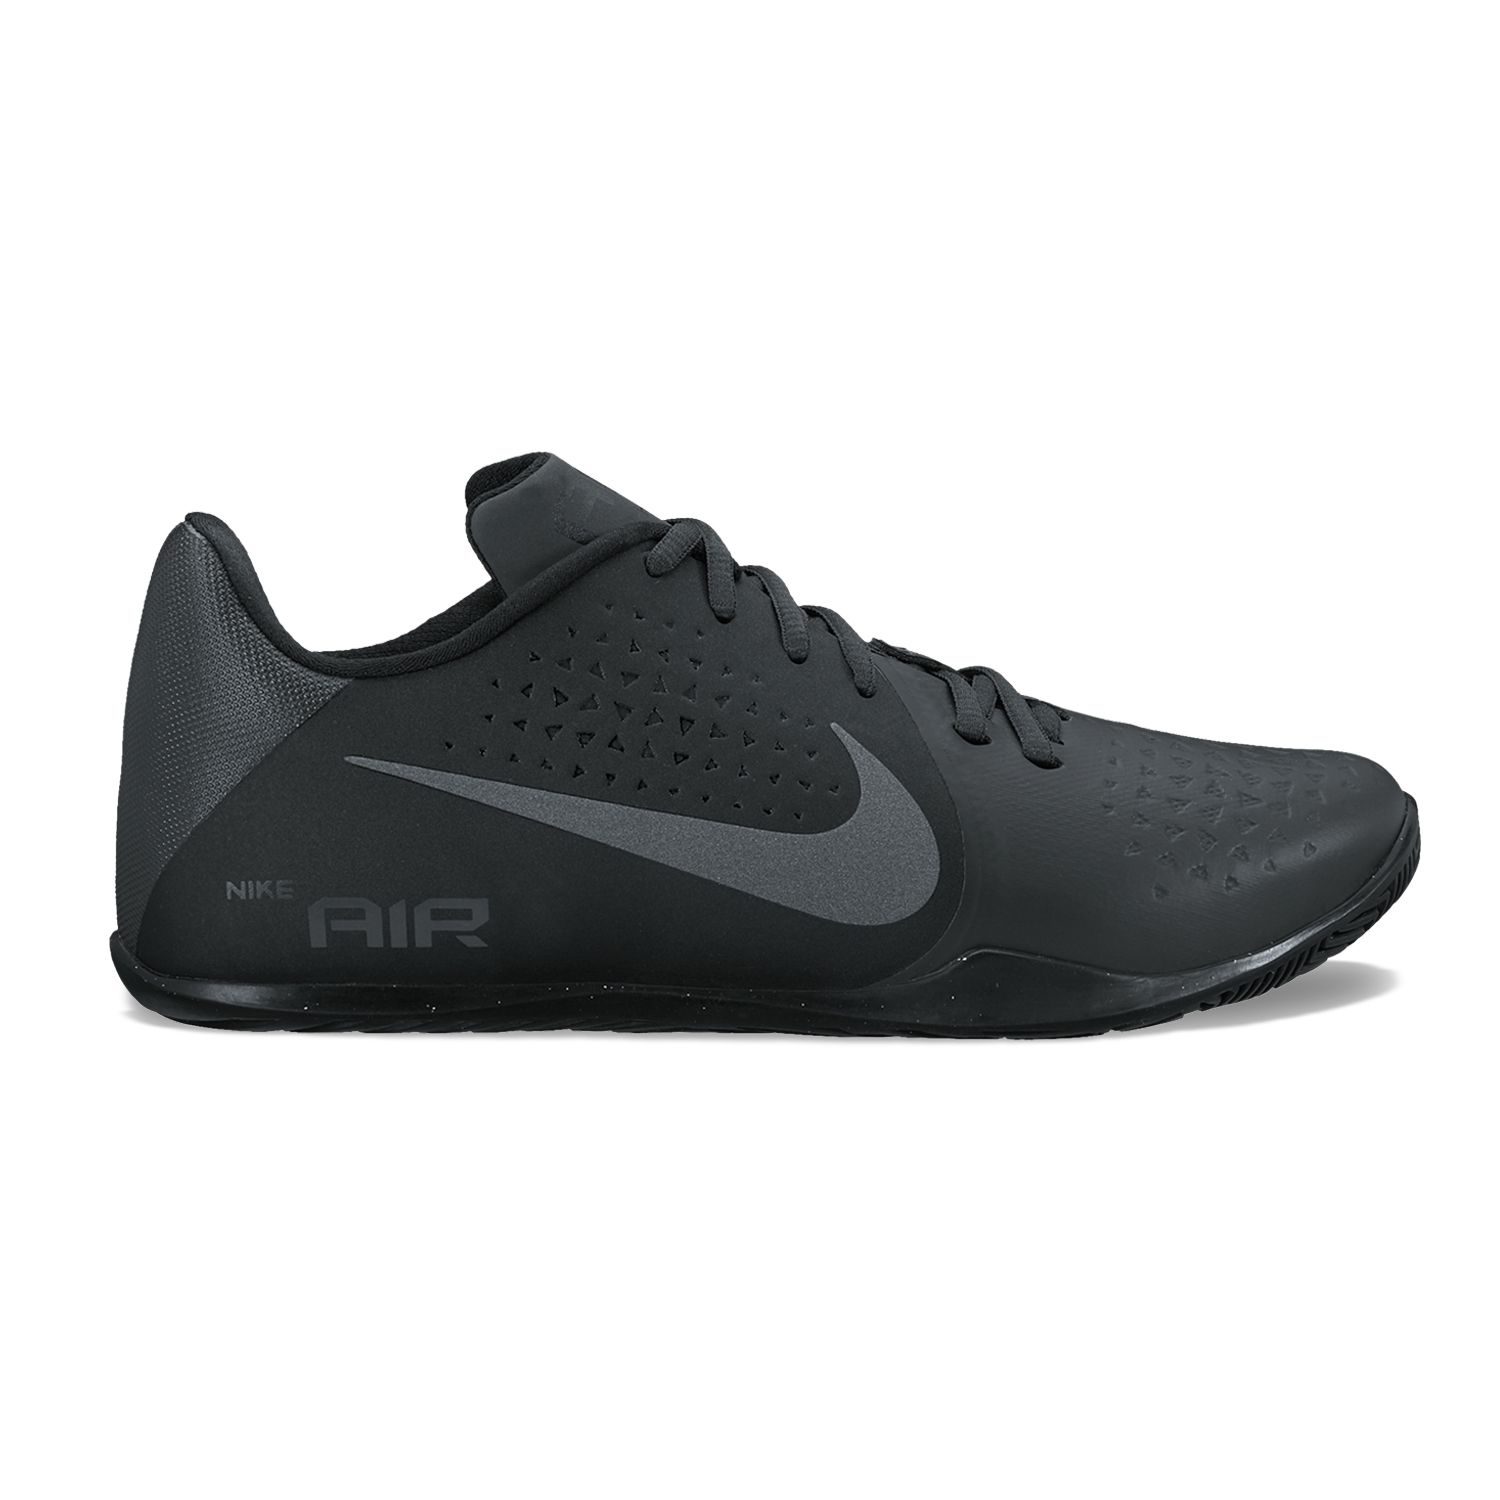 nike low profile running shoes